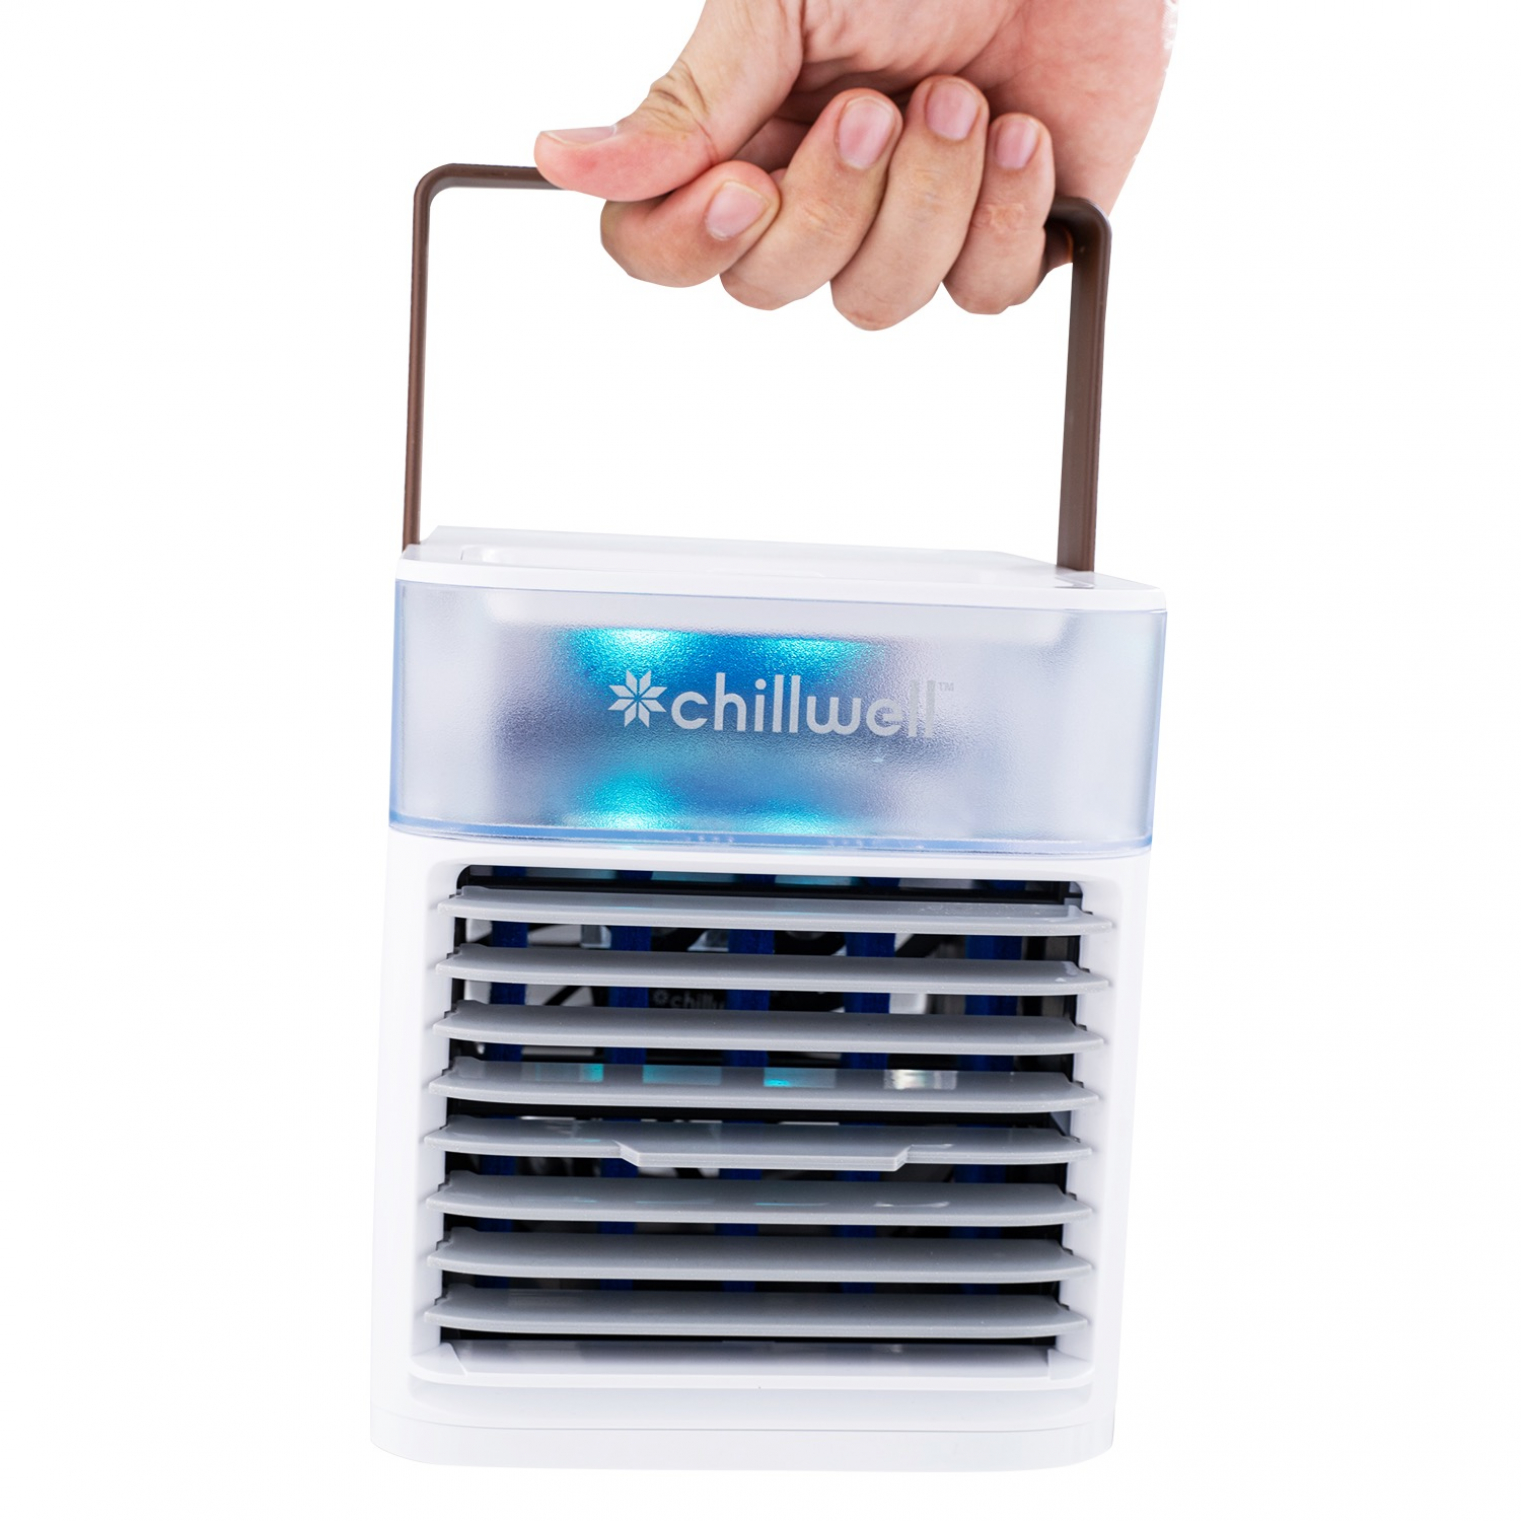 Best Place To Buy Chillwell AC